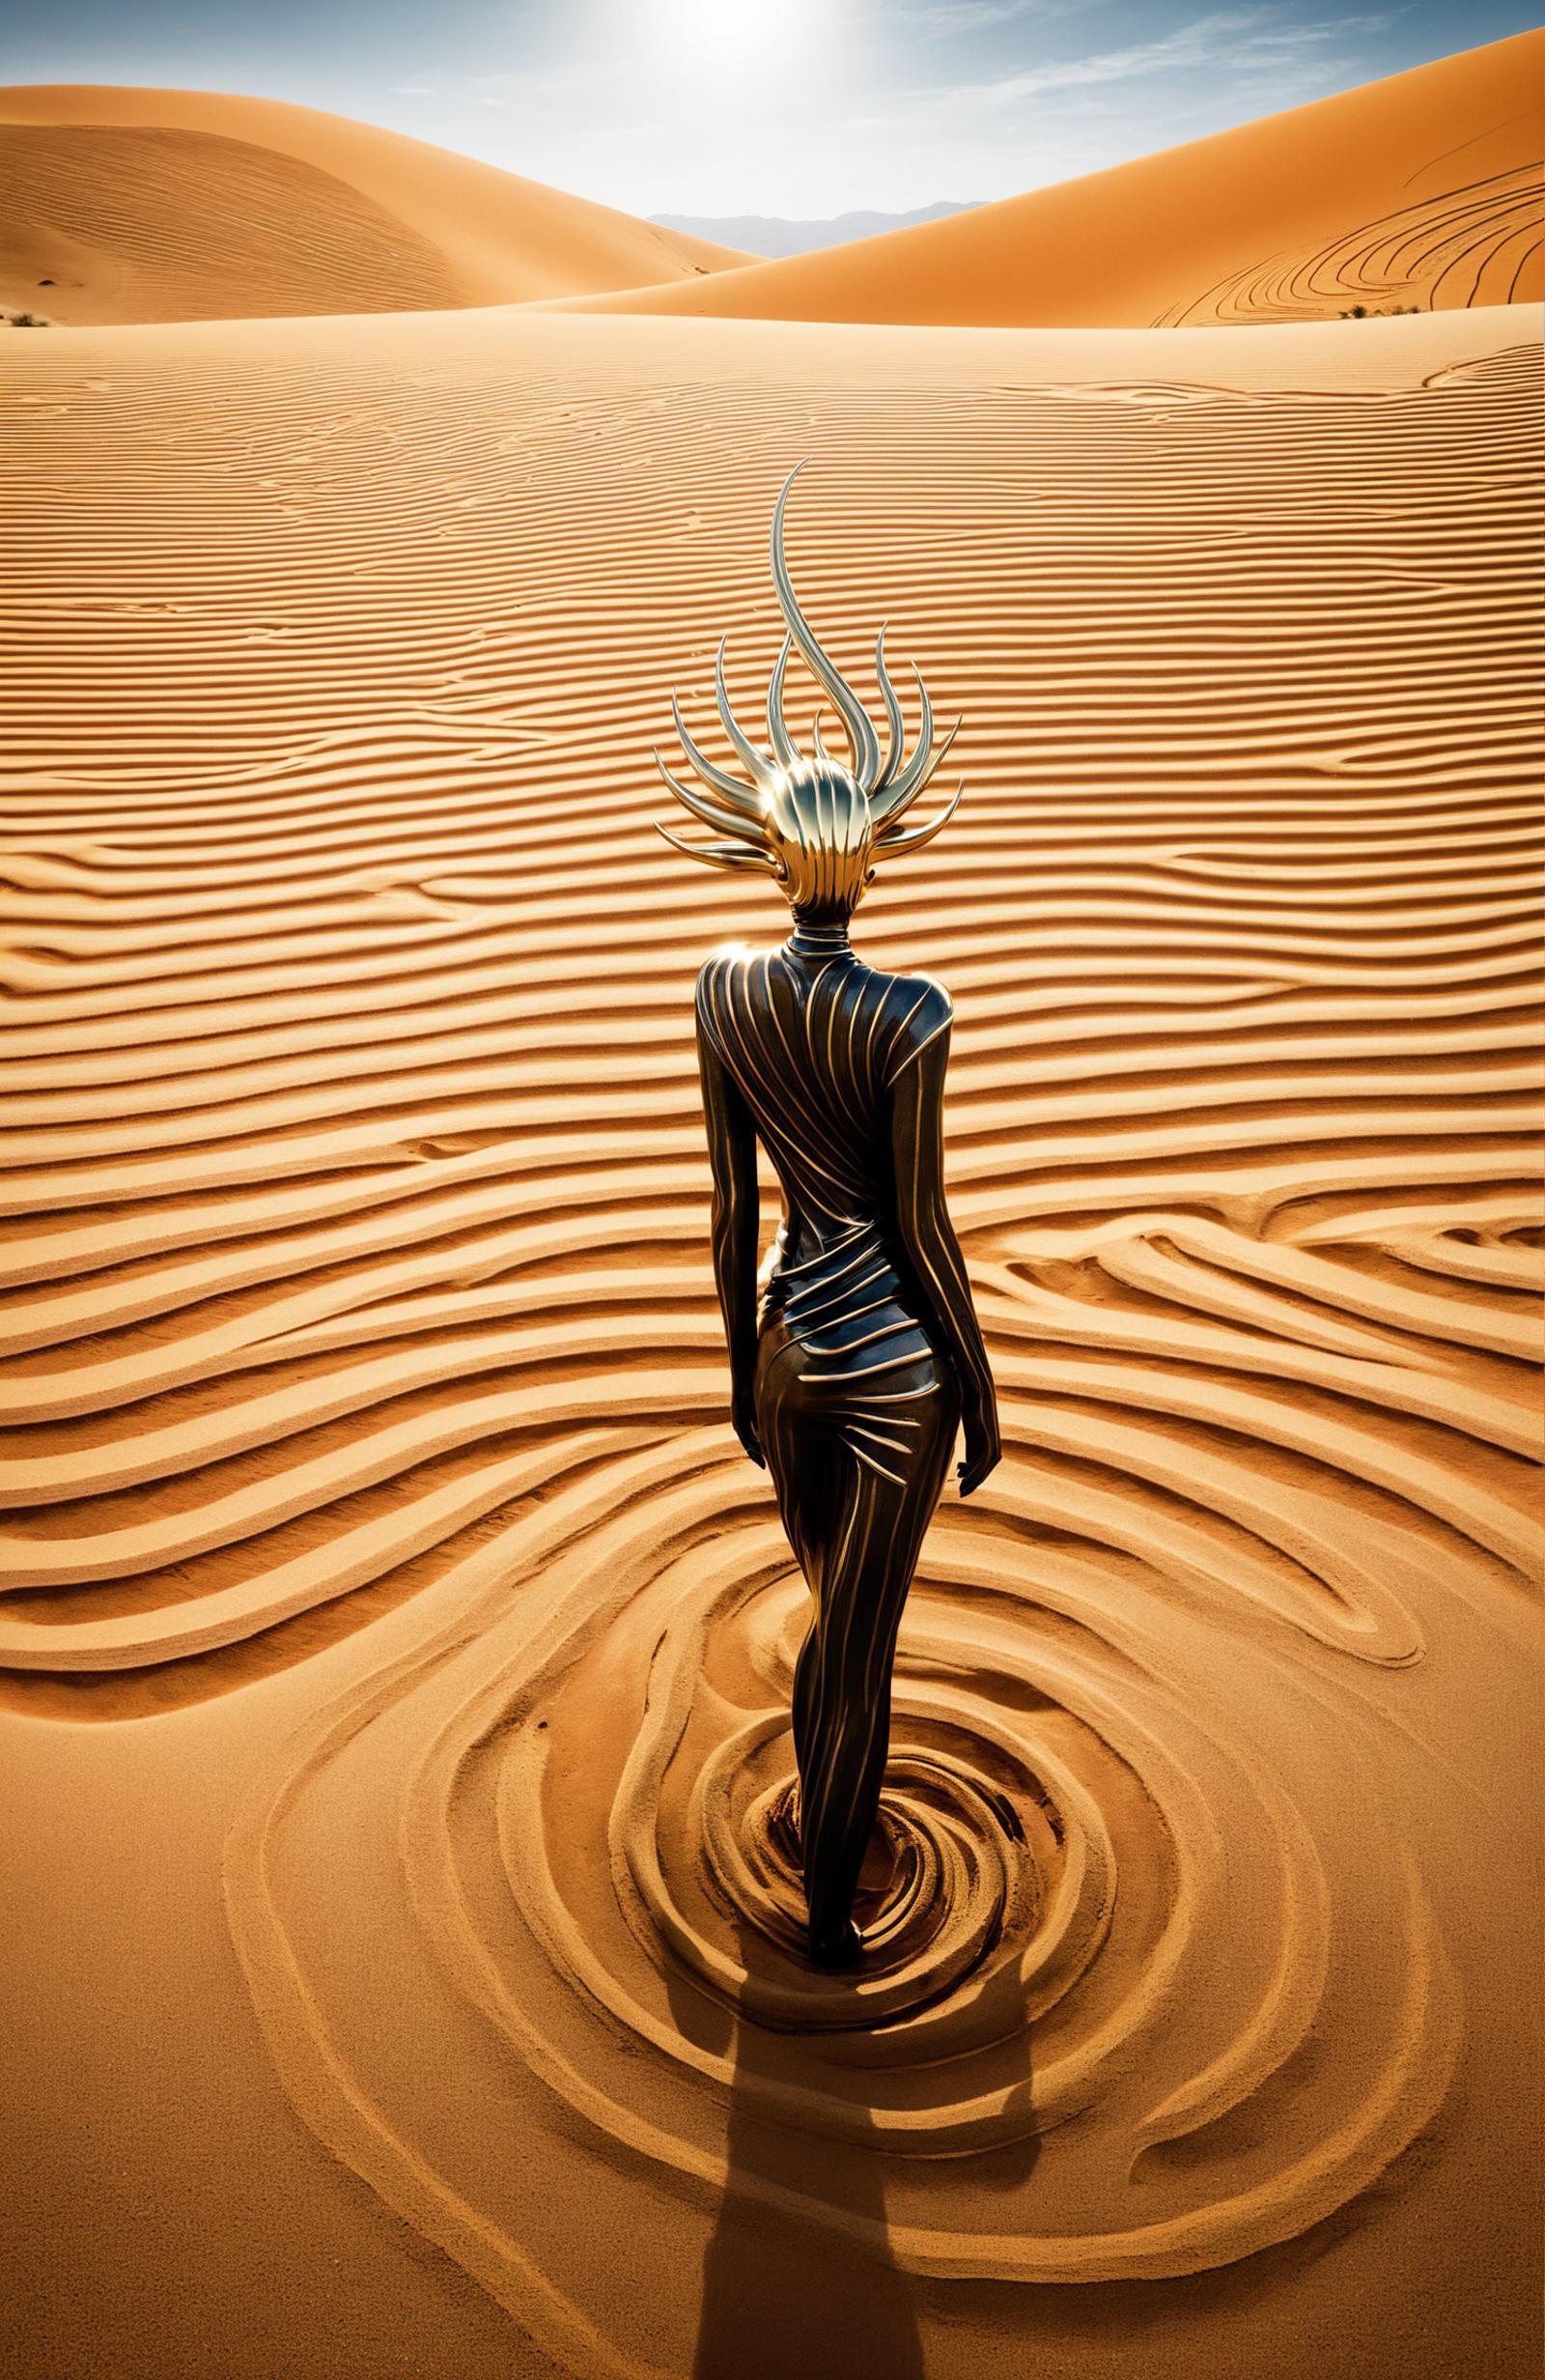 The Statue of a Woman in the Desert